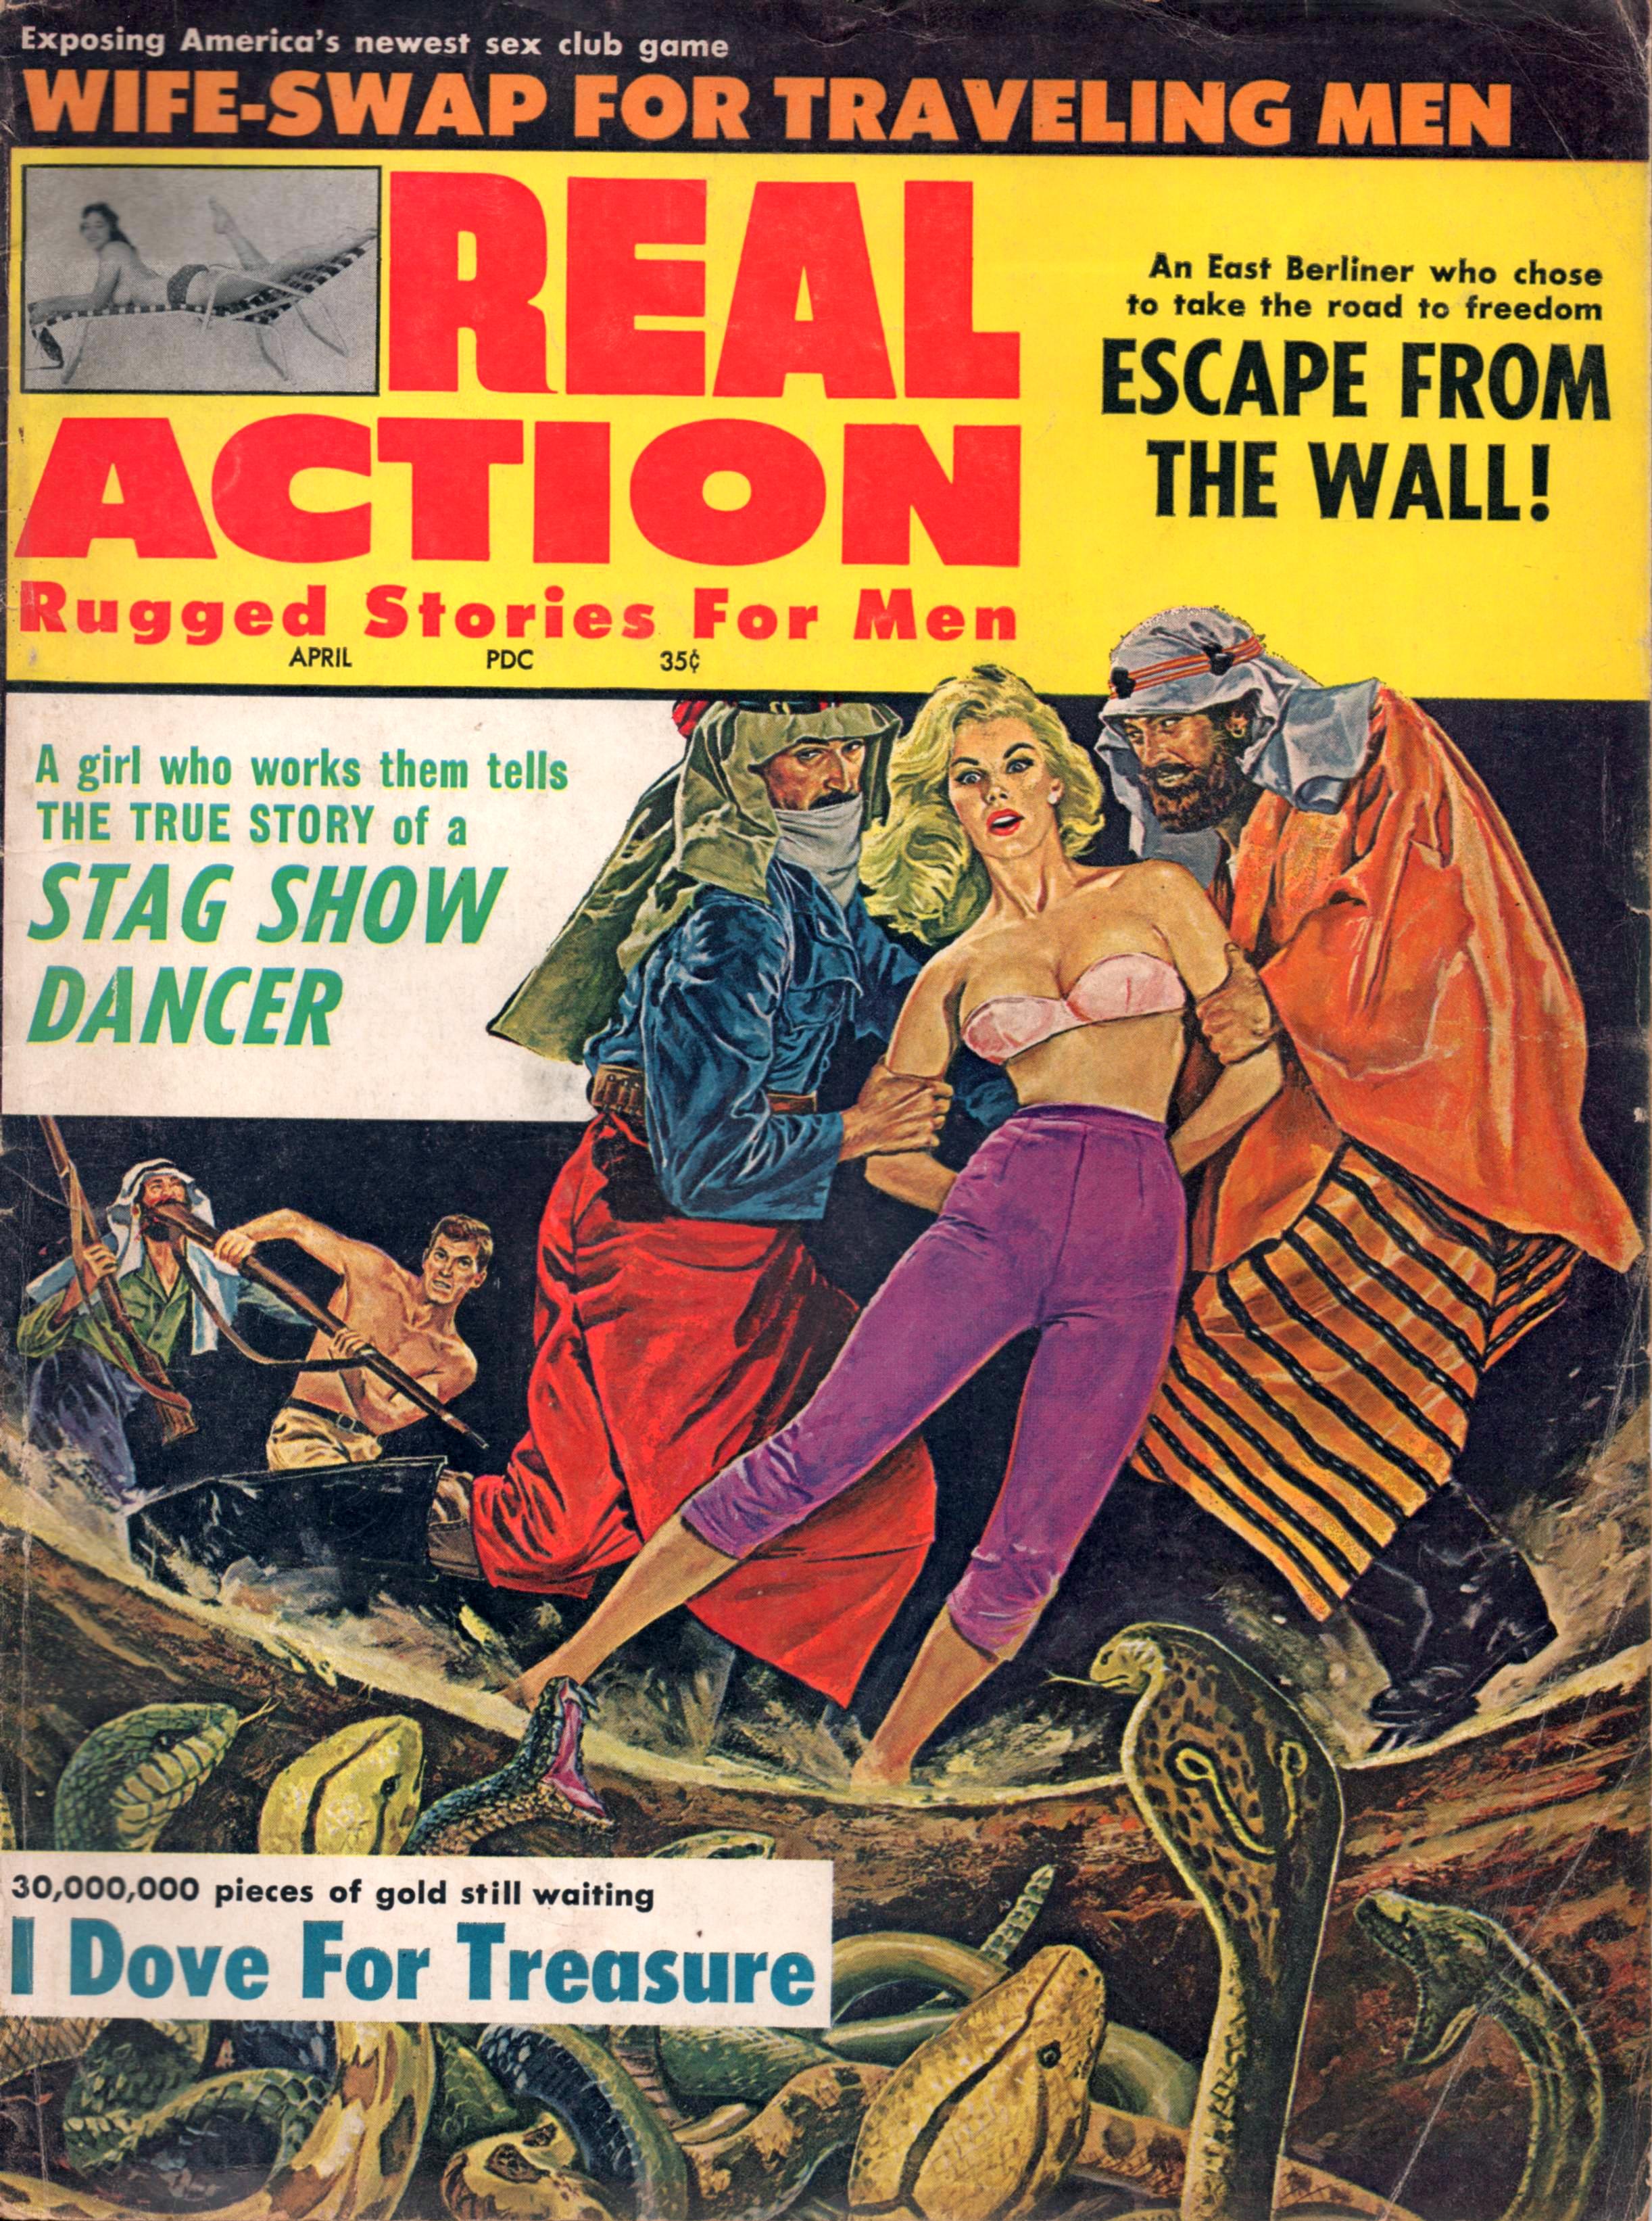 Are American Men Sex Failures / Wife-Swap For Traveling Men -- Pulp Covers photo